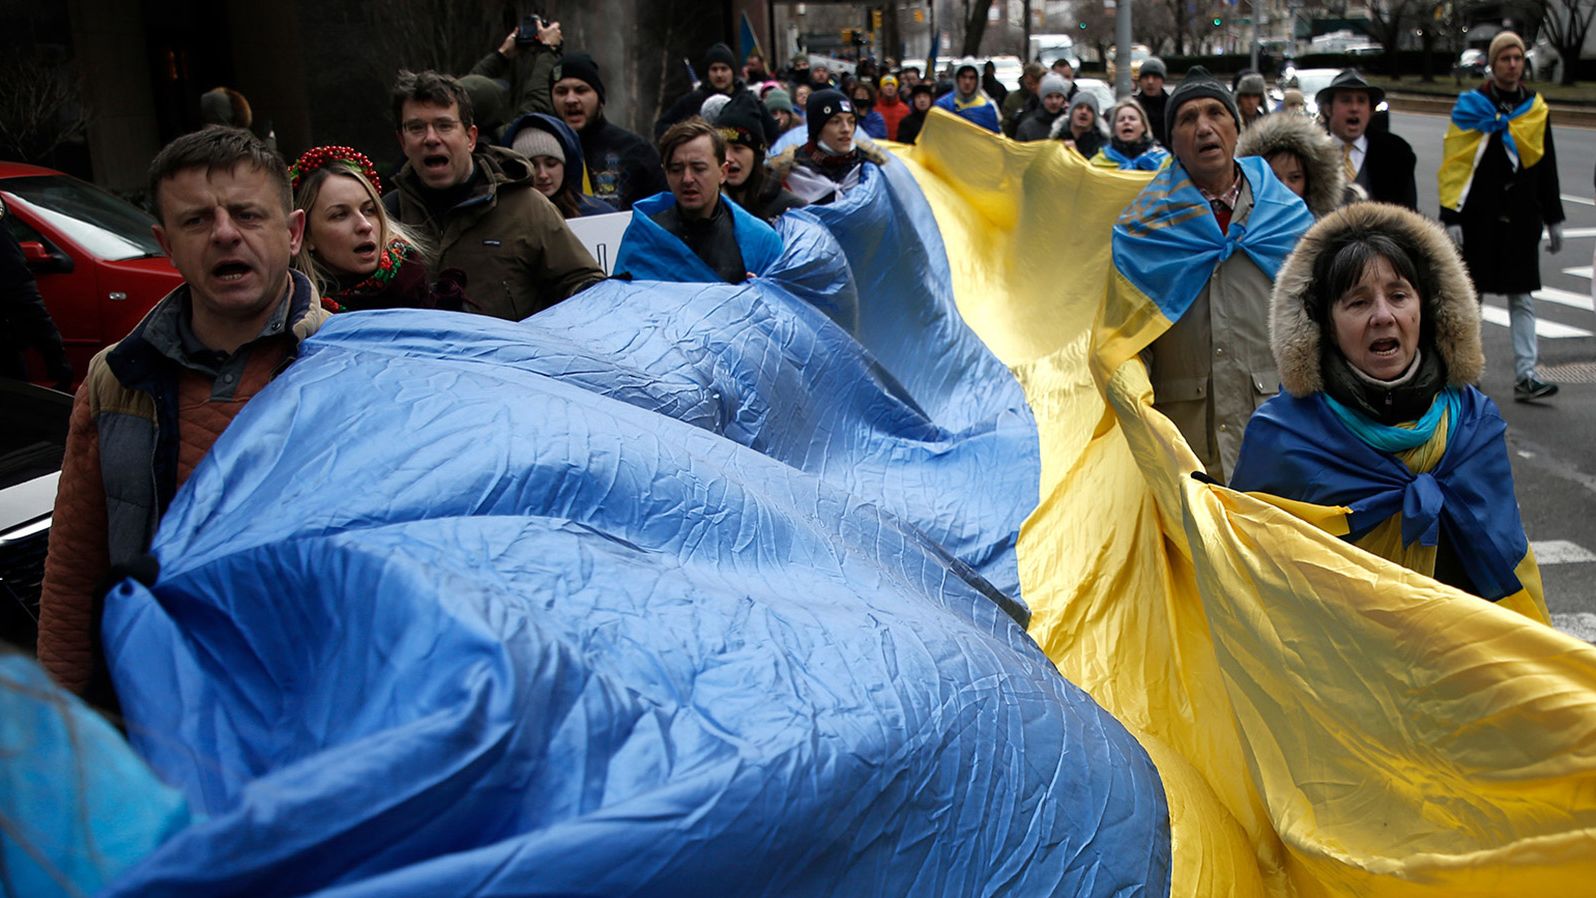 Ukraine supporters march through the streets of New York with flags and signs on February 24.